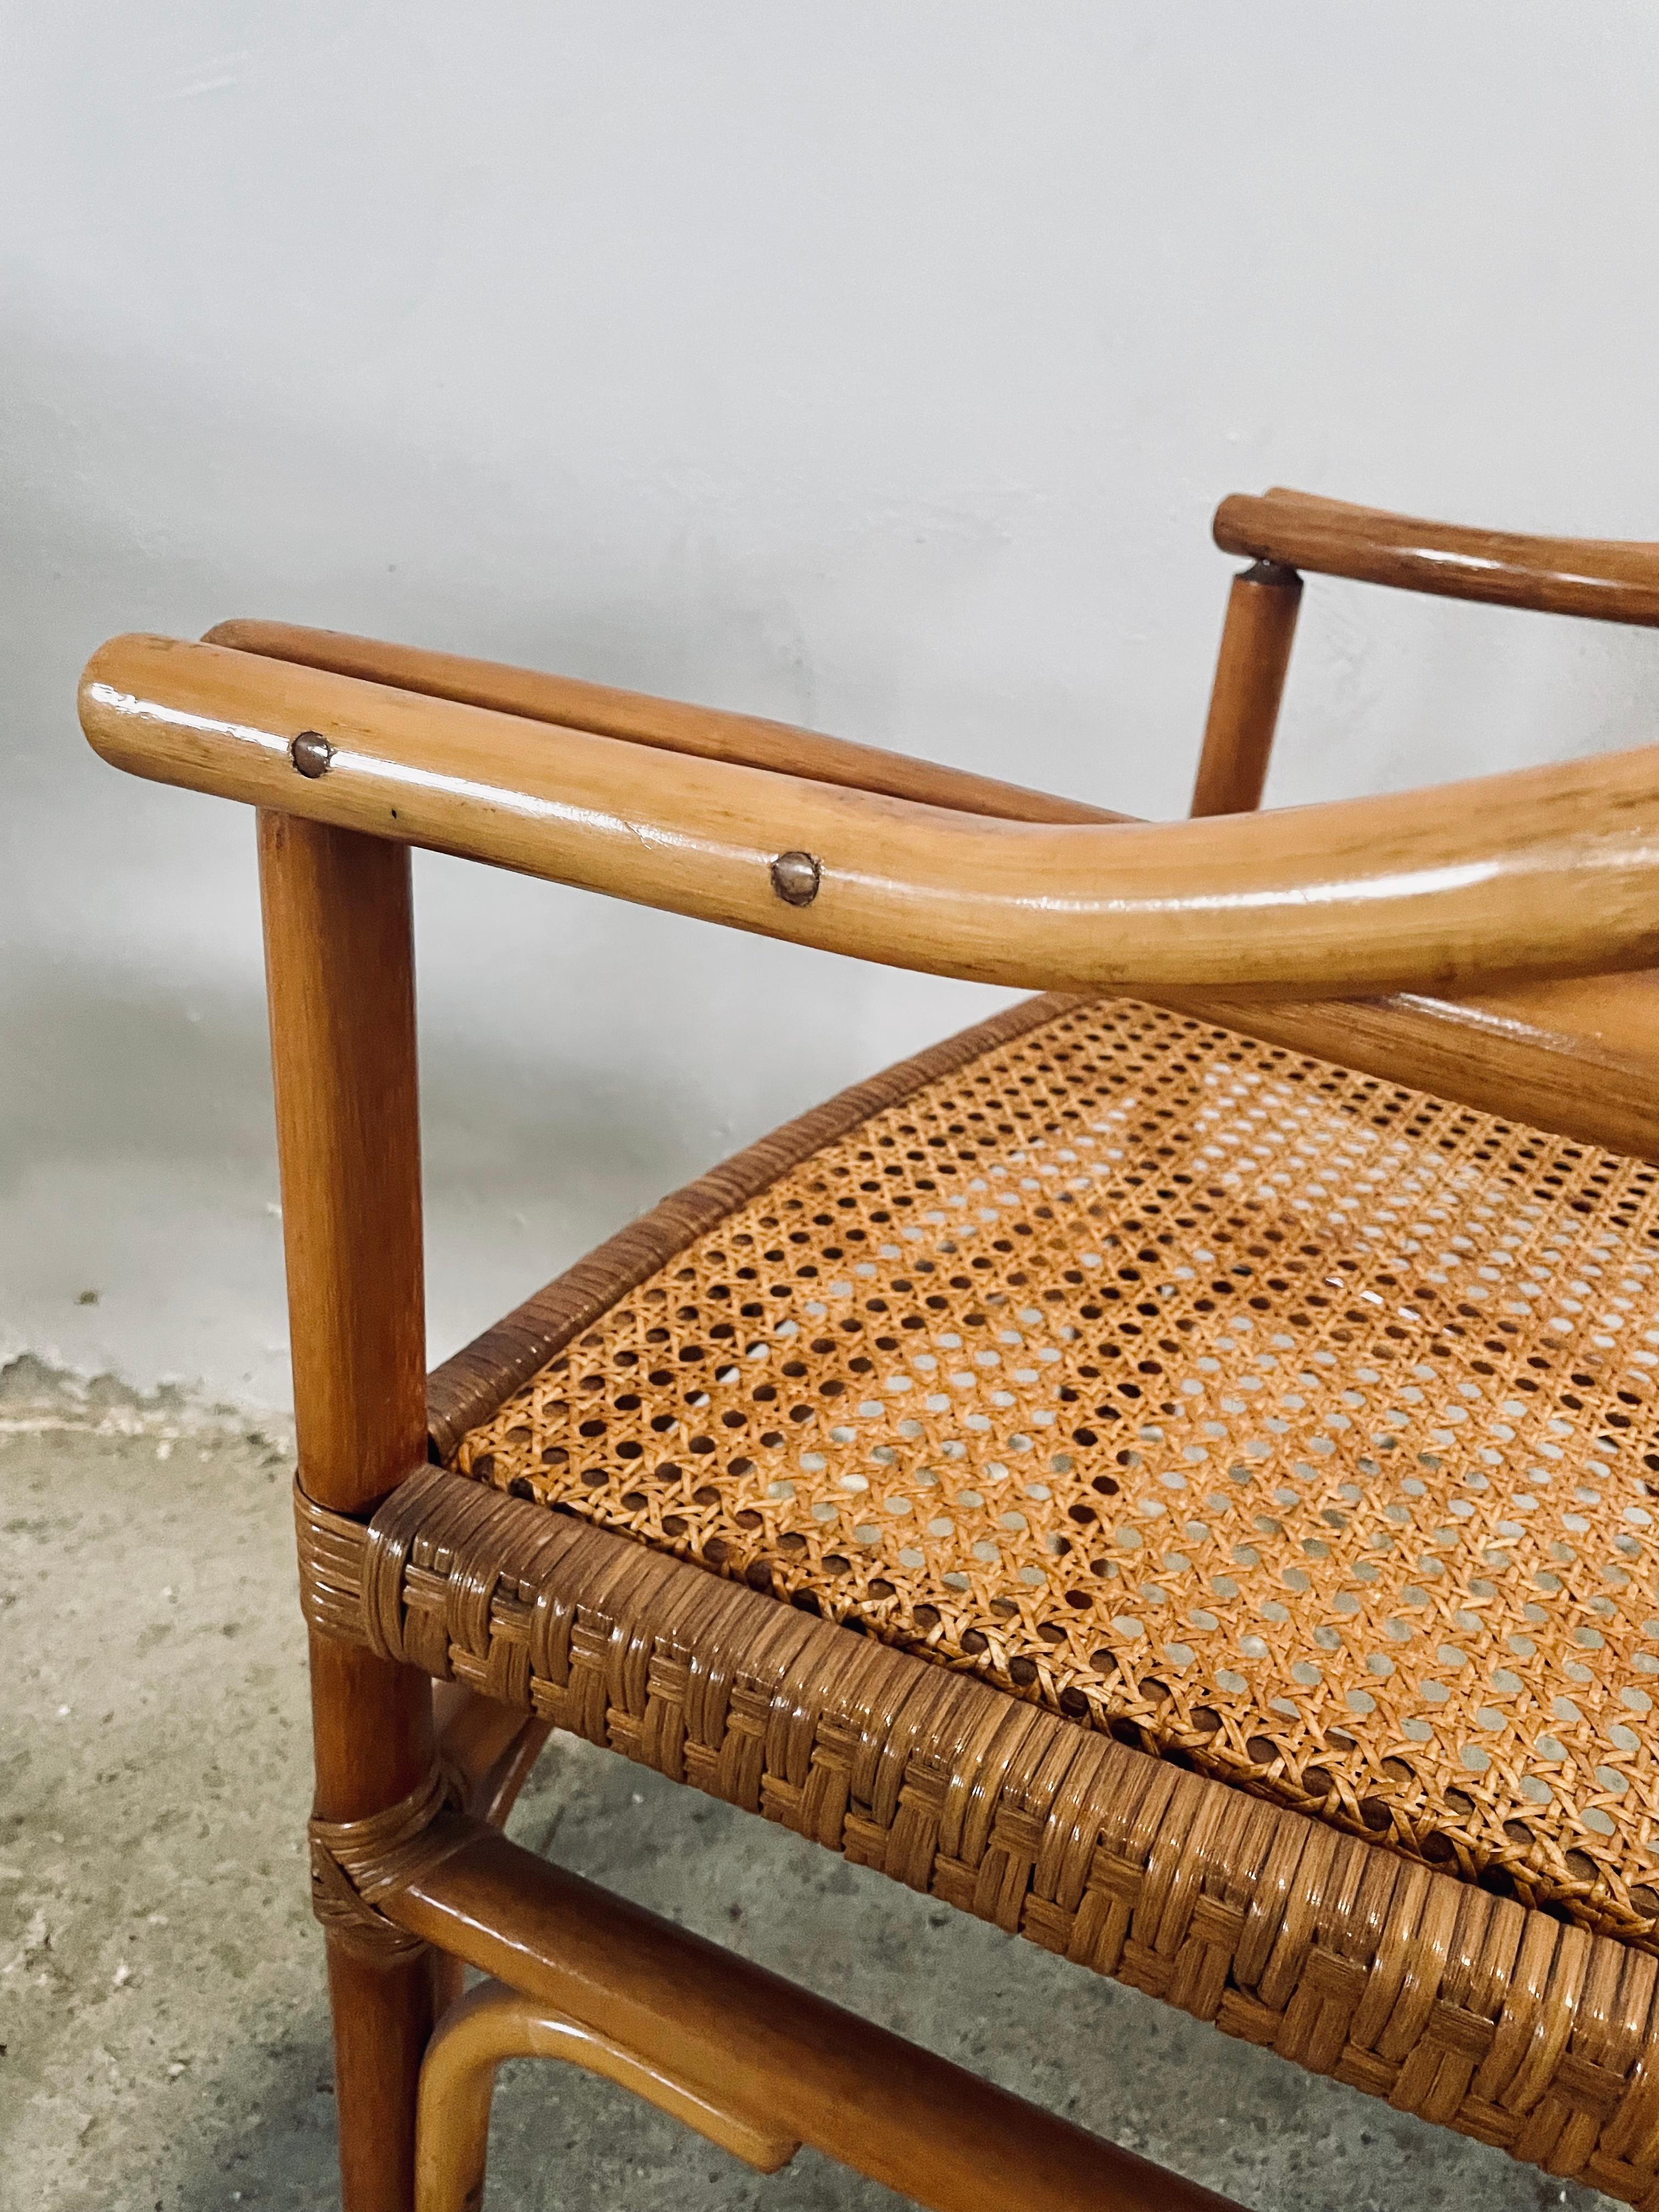 1 of 3, Rare French Vintage Bistro rattan and/o bamboo Chairs or dining chairs, original color, great patina, sturdy, strong frames, new rattan seats just replaced.

**The price on the offer is for EACH chair, there’s three available, you can buy